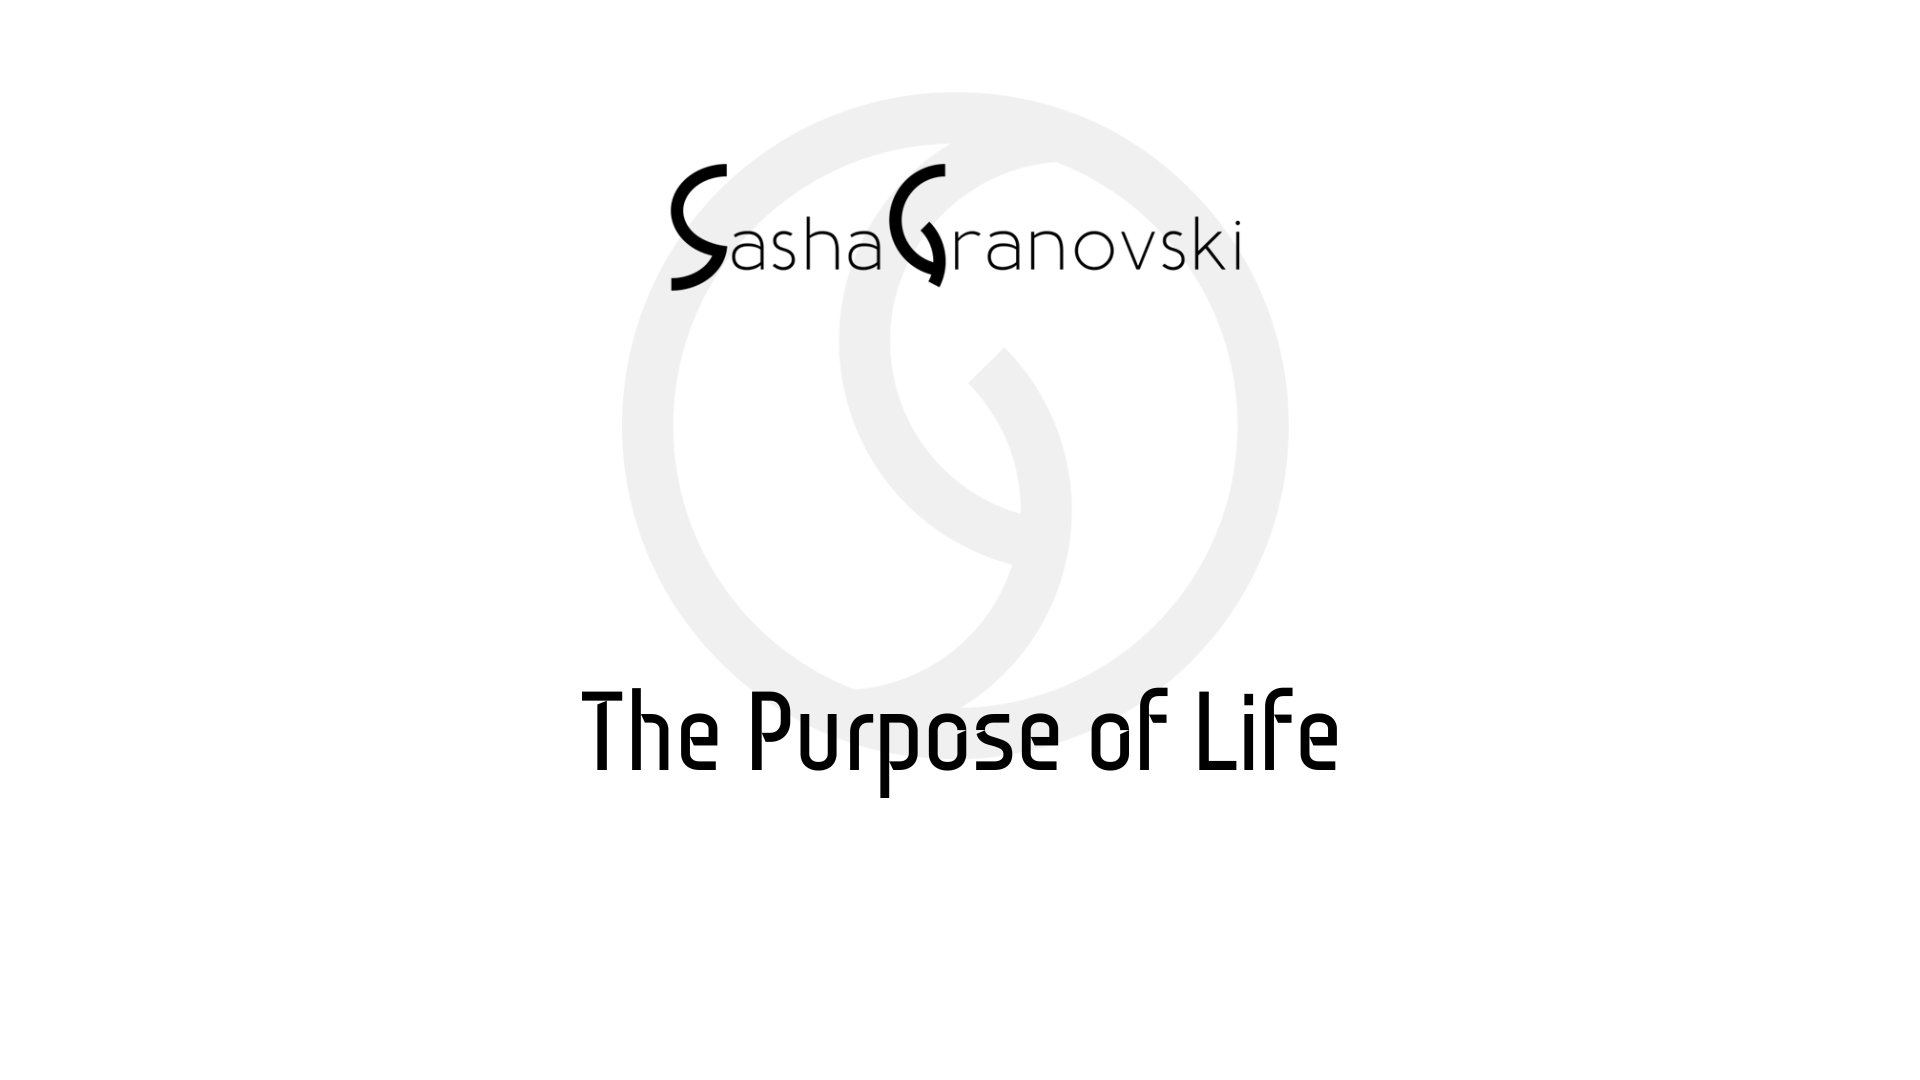 Finding your purpose or why goal setting doesn't work